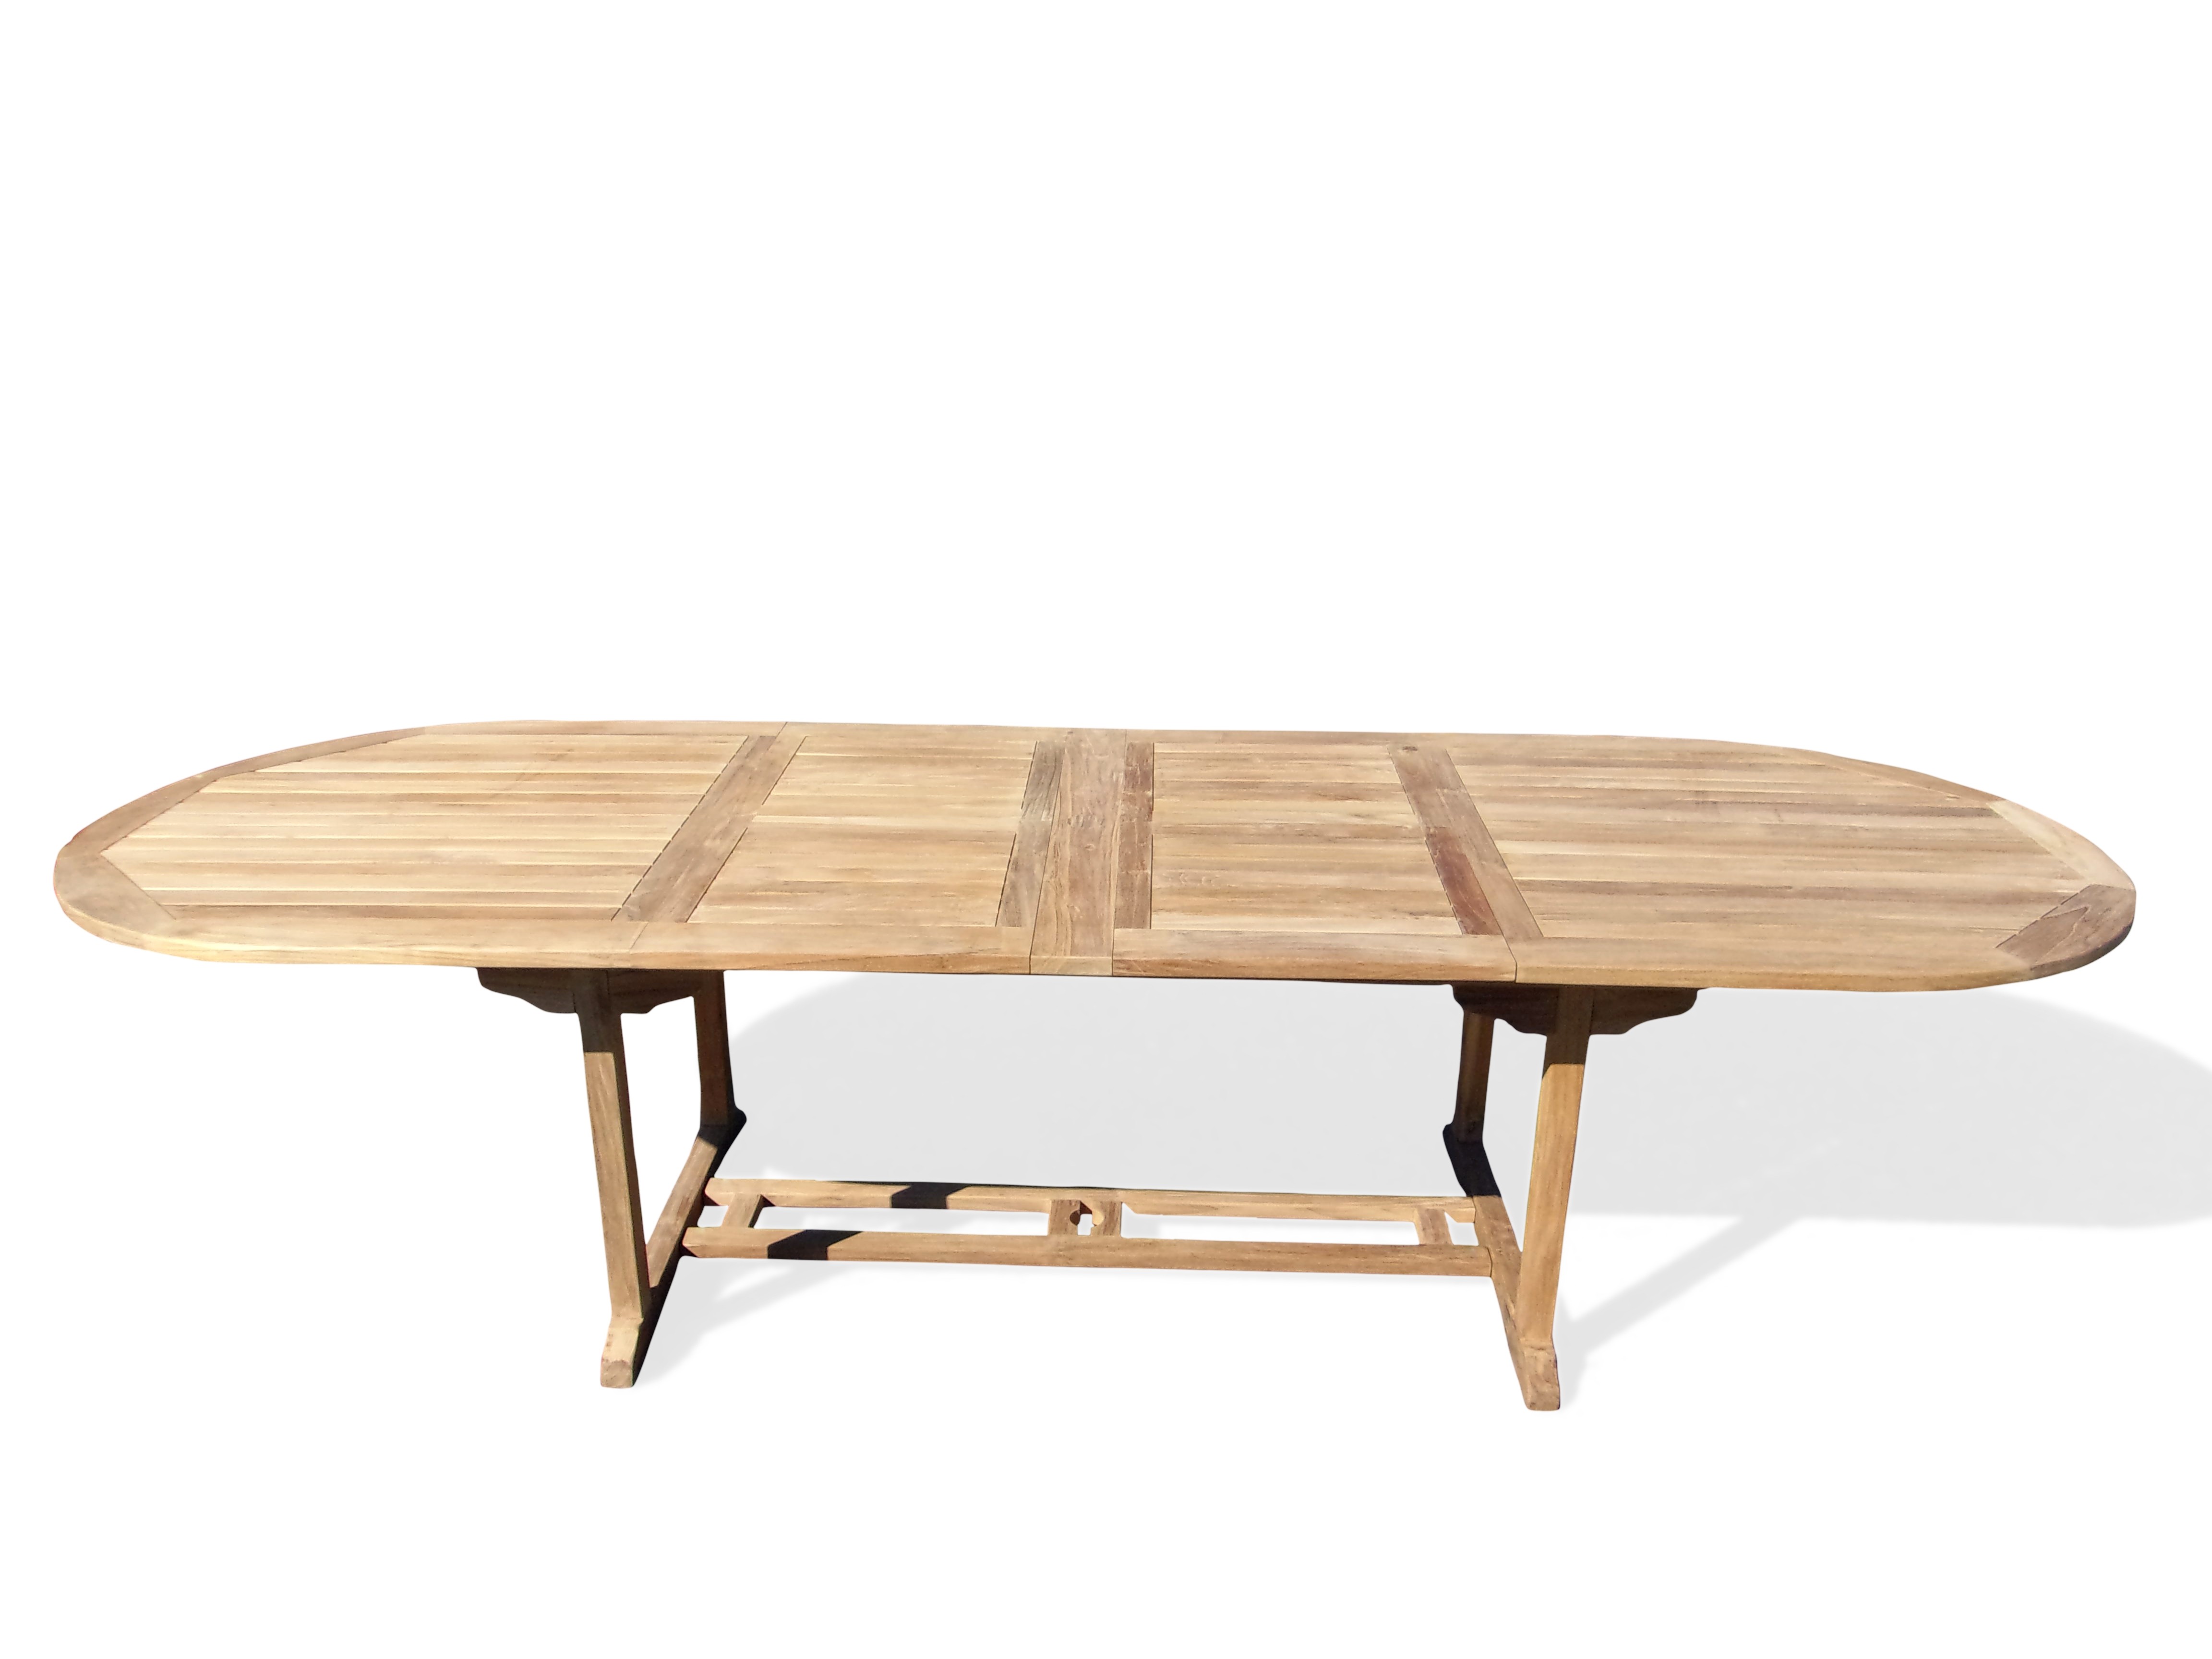 Grade A Teak Buckingham 118" x 39" Oval Double Leaf Extension Table...Seats 10-12...makes 3 Different Size Tables